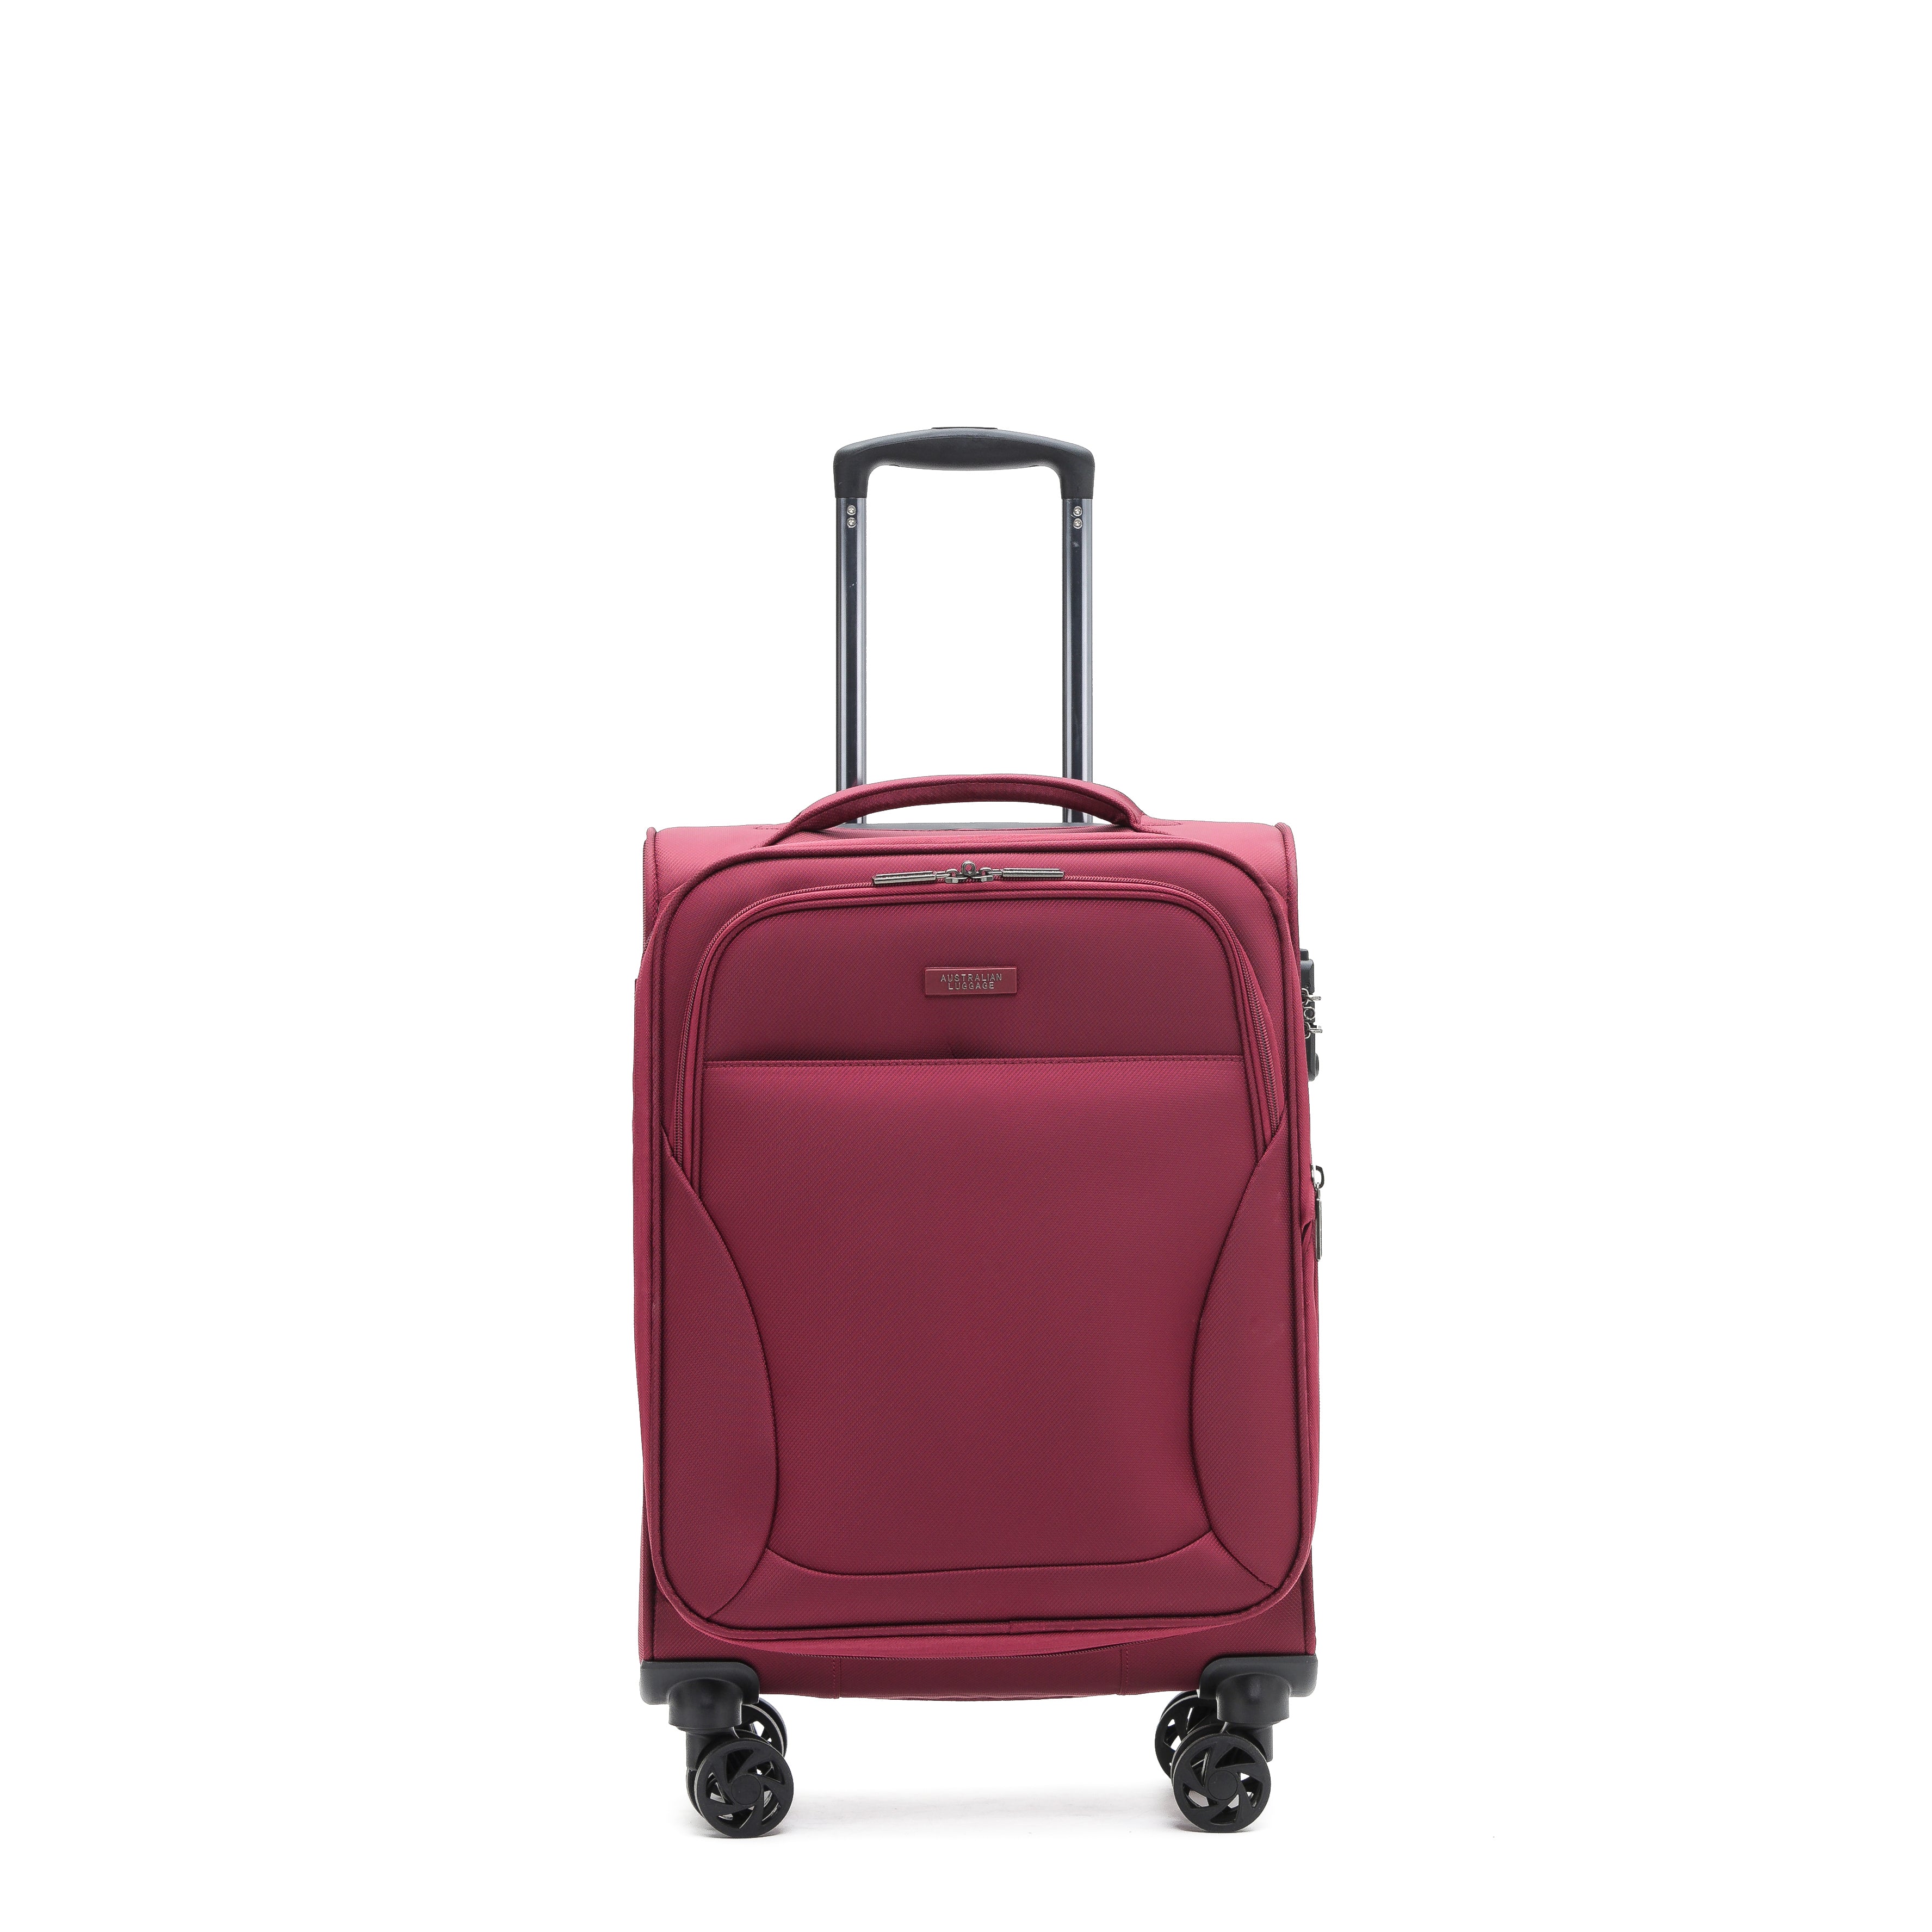 Aus Luggage - WINGS Set of 3 Suitcases - Wine-10